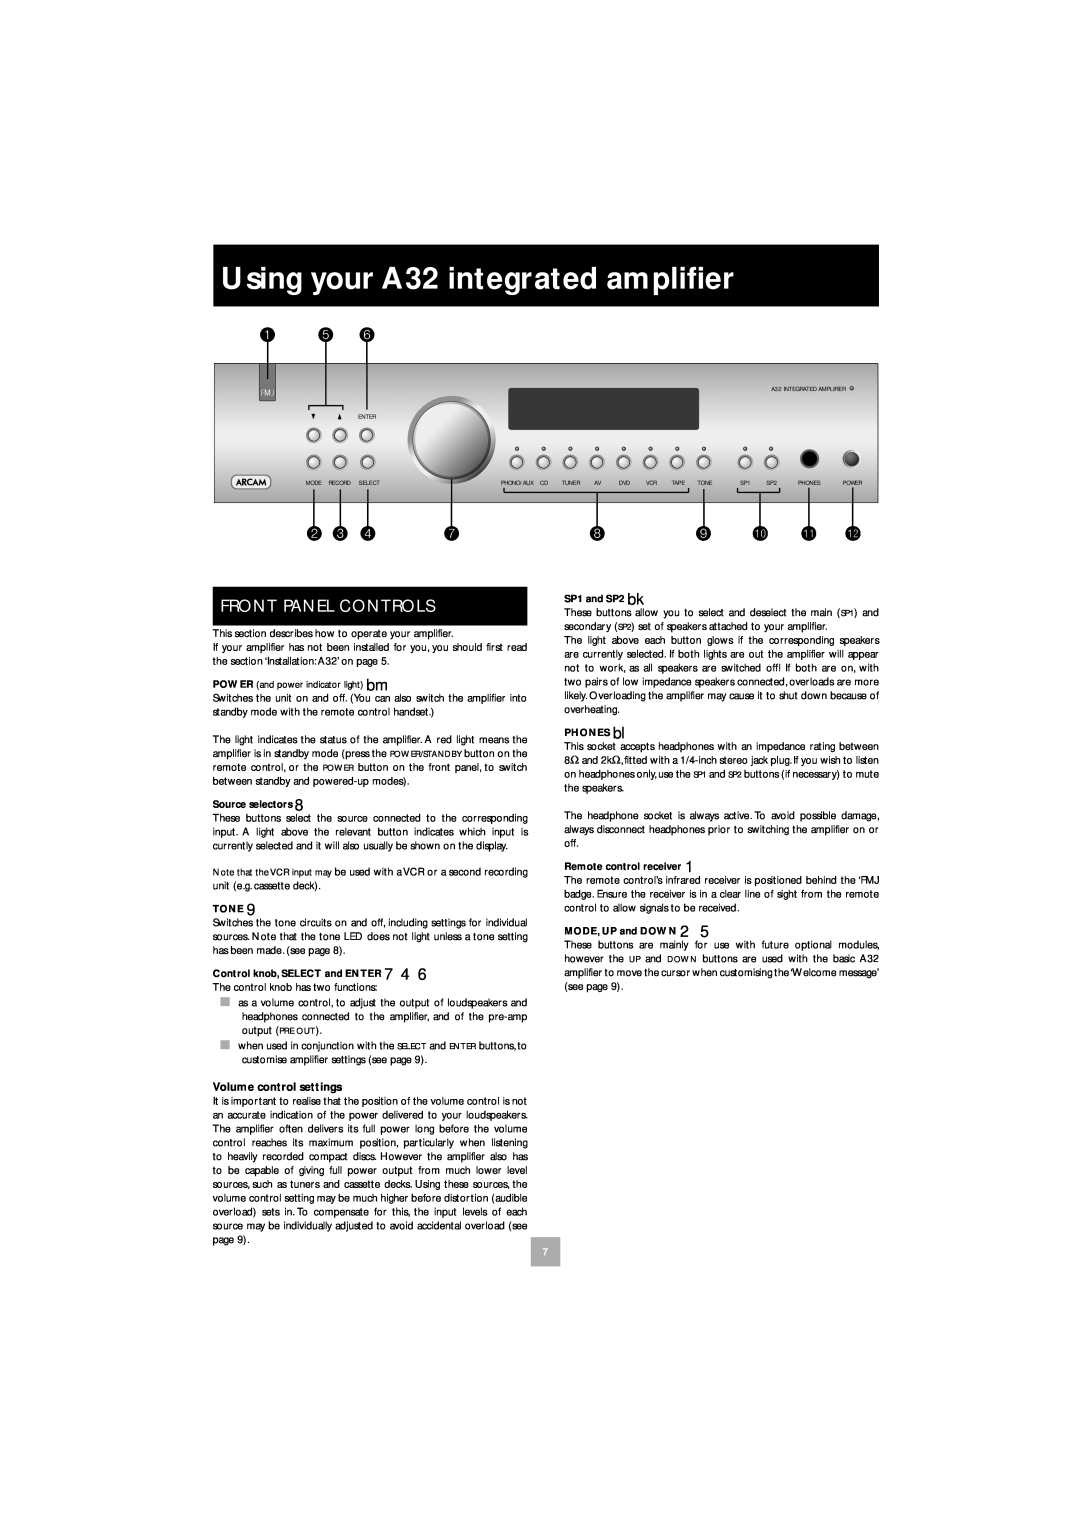 Arcam P35 manual Using your A32 integrated ampliﬁer, bk bl bm, Front Panel Controls 